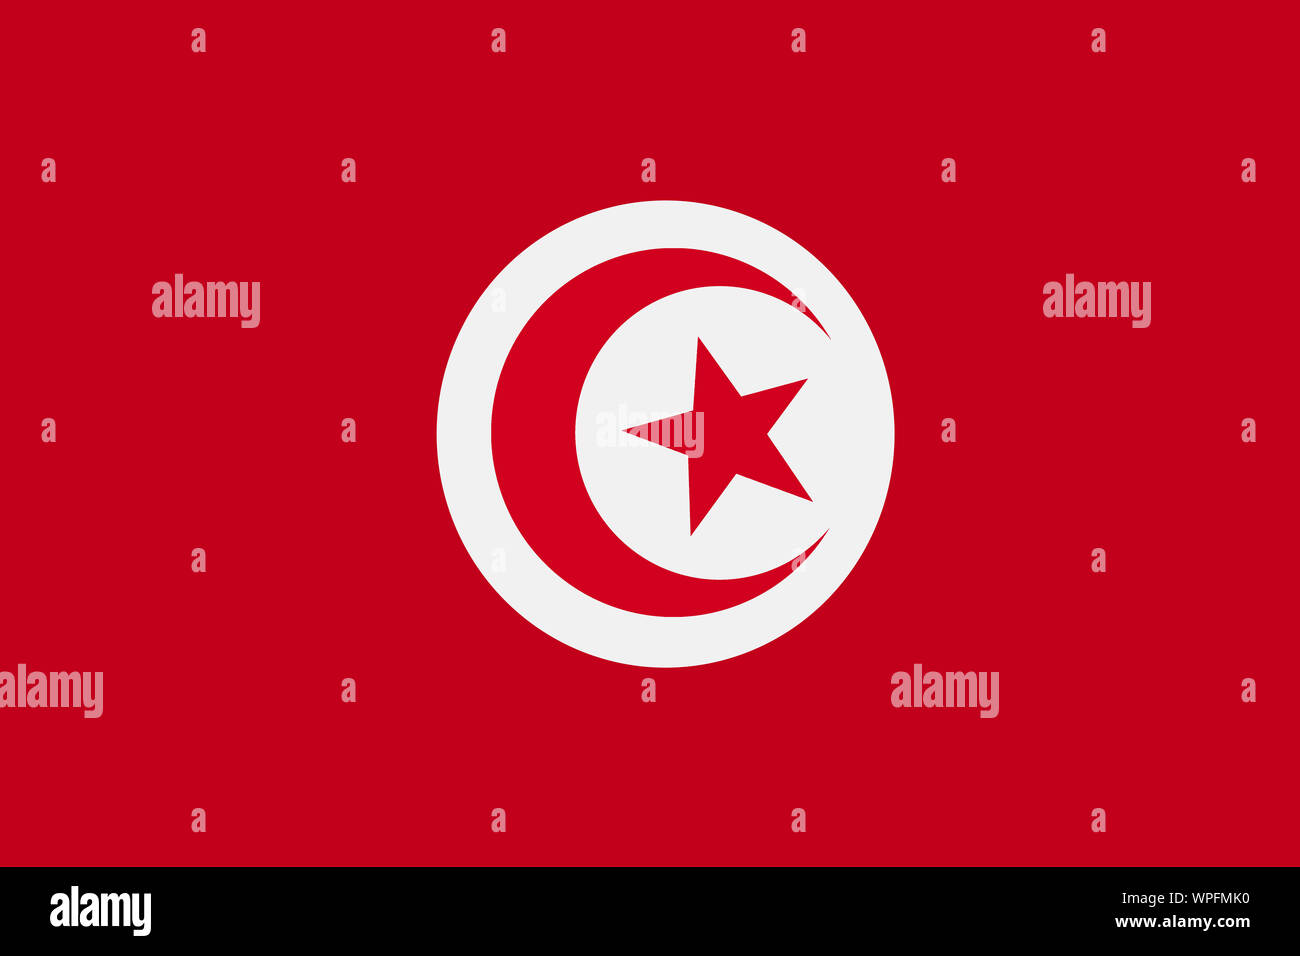 A Tunisia flag background illustration red crescent moon star Stock Photo